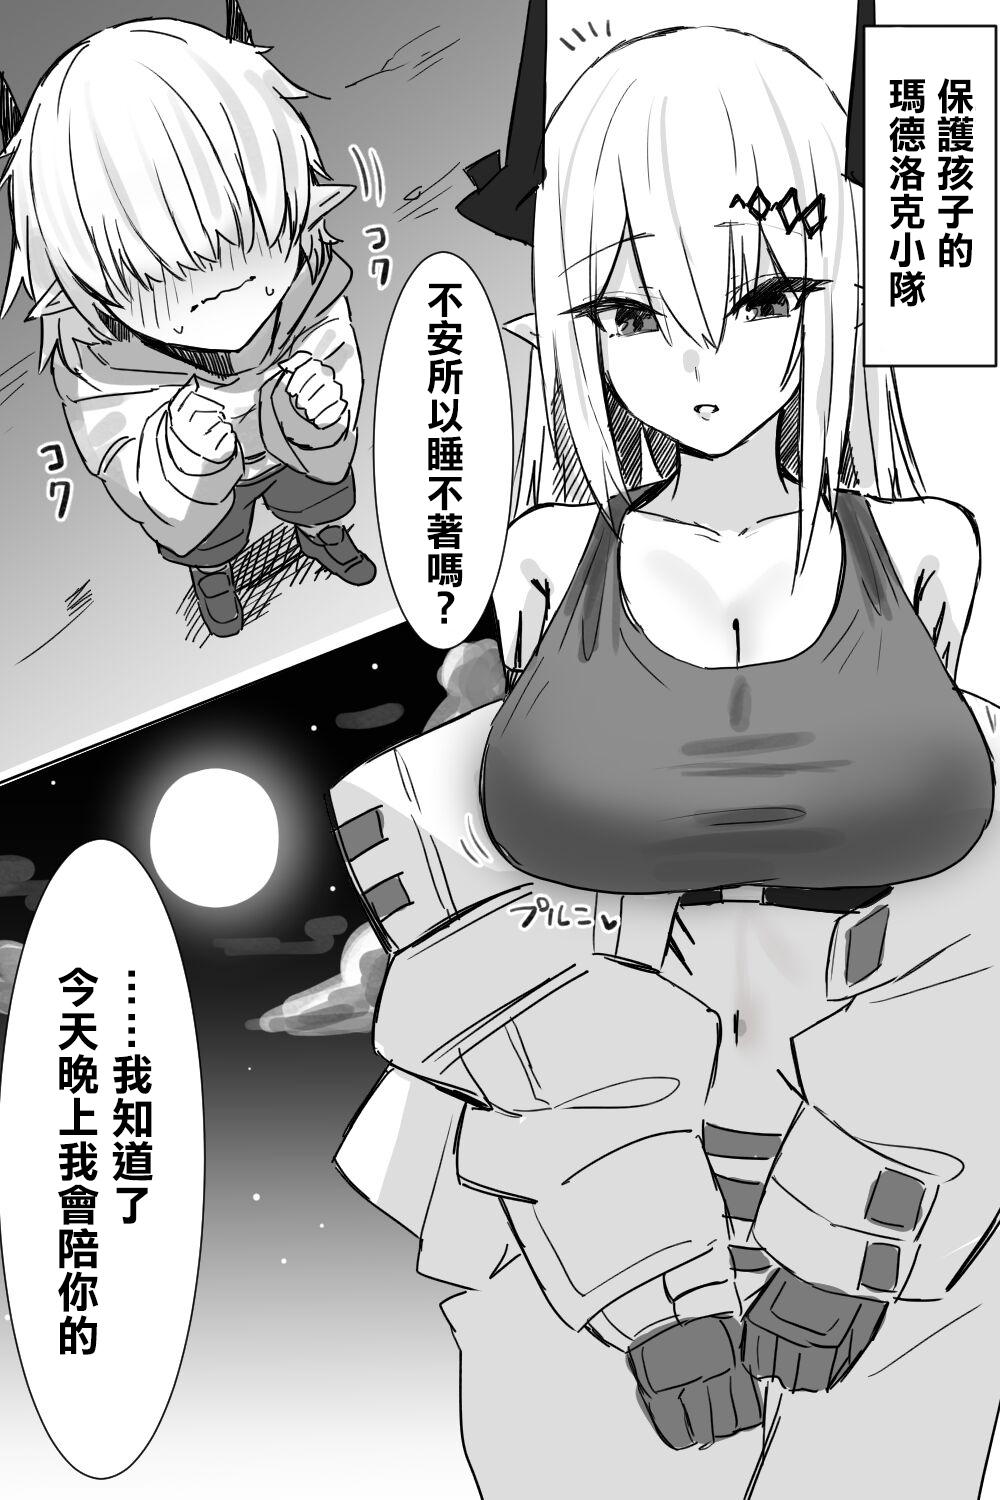 Thong マドロックが保護した子供に… - Arknights Clothed - Page 1